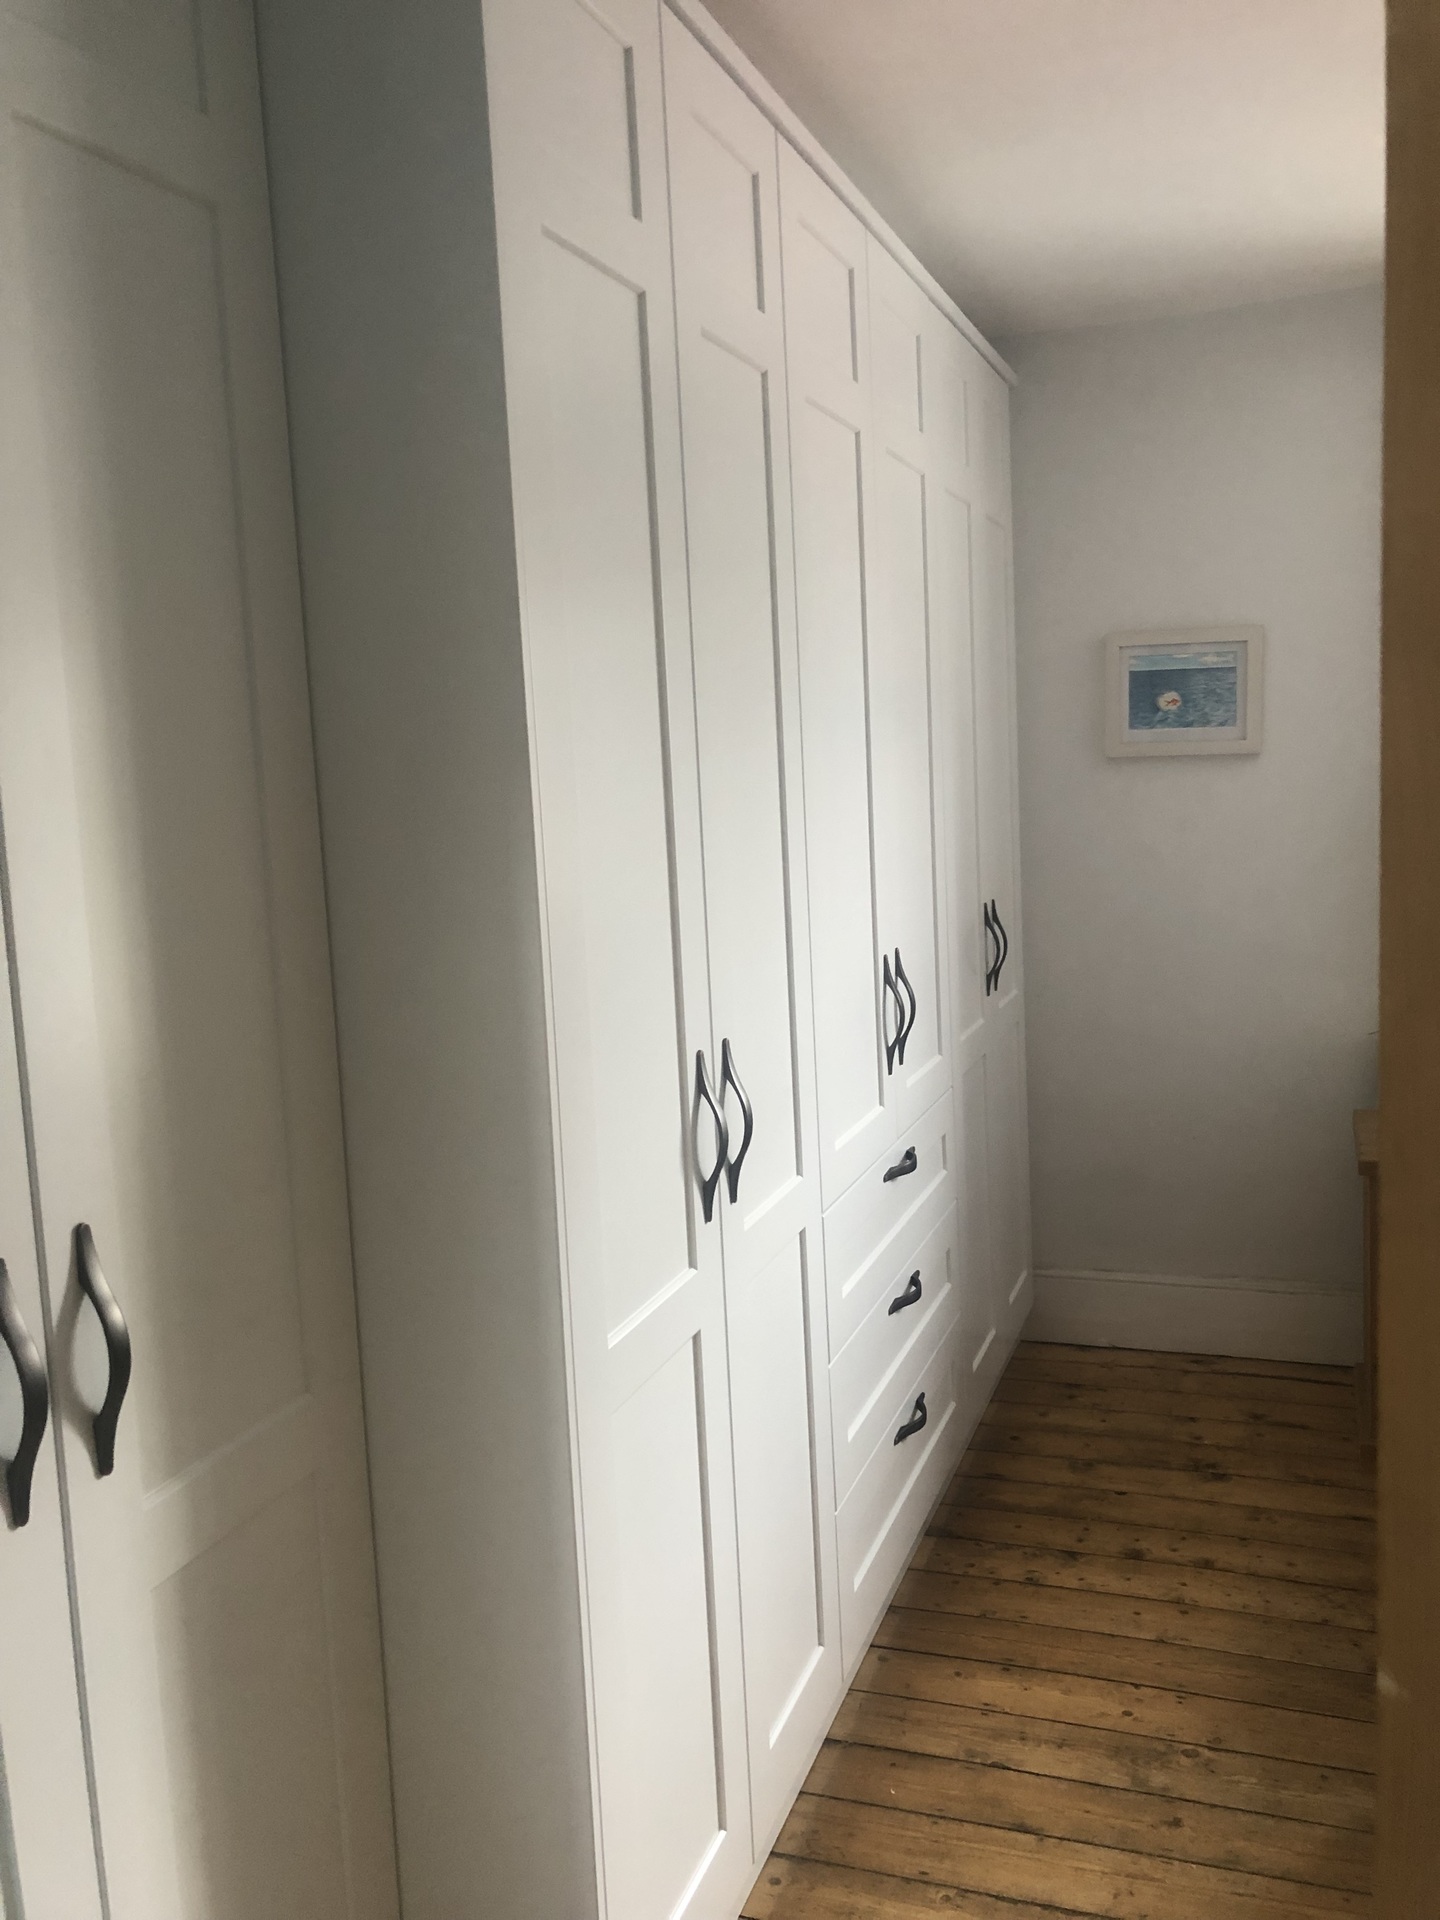 Bespoke fitted wardrobes, Oxford